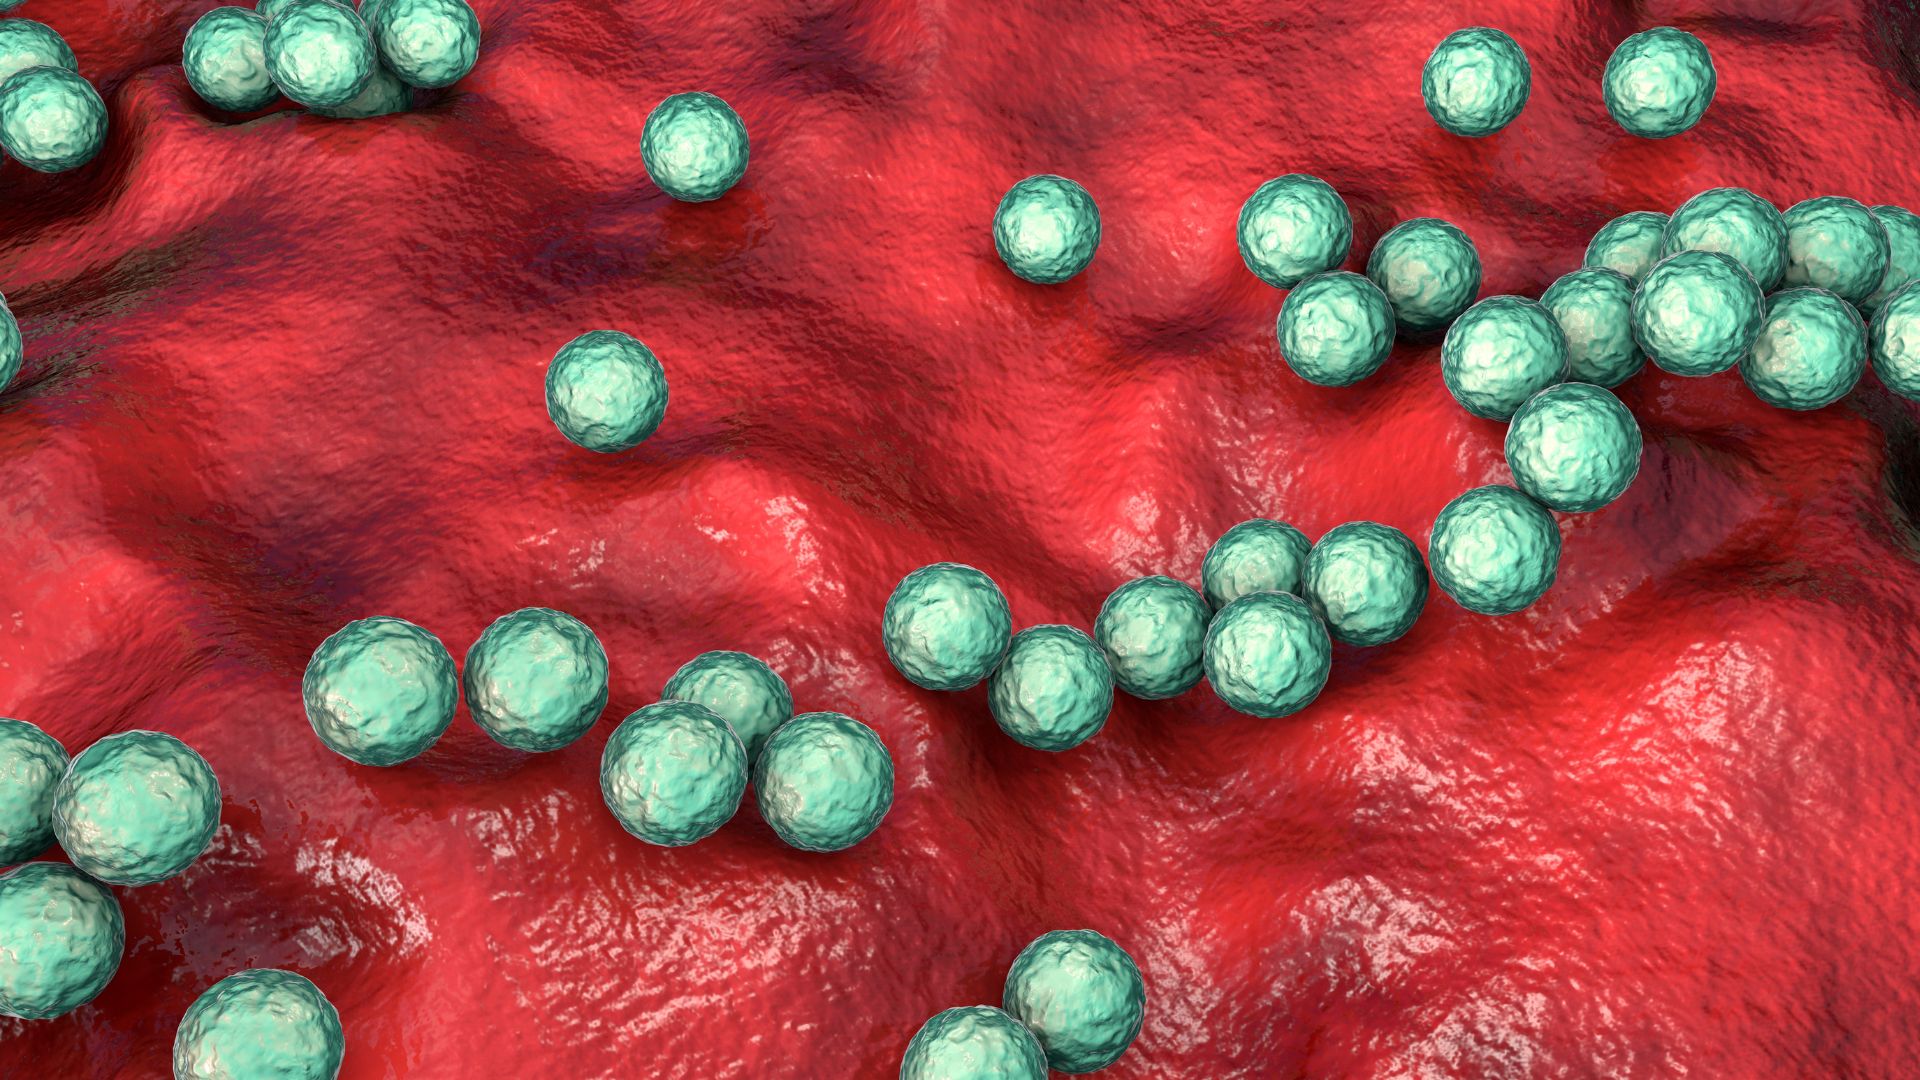  Dangerous strep infection surging in the UK may be spreading in US 